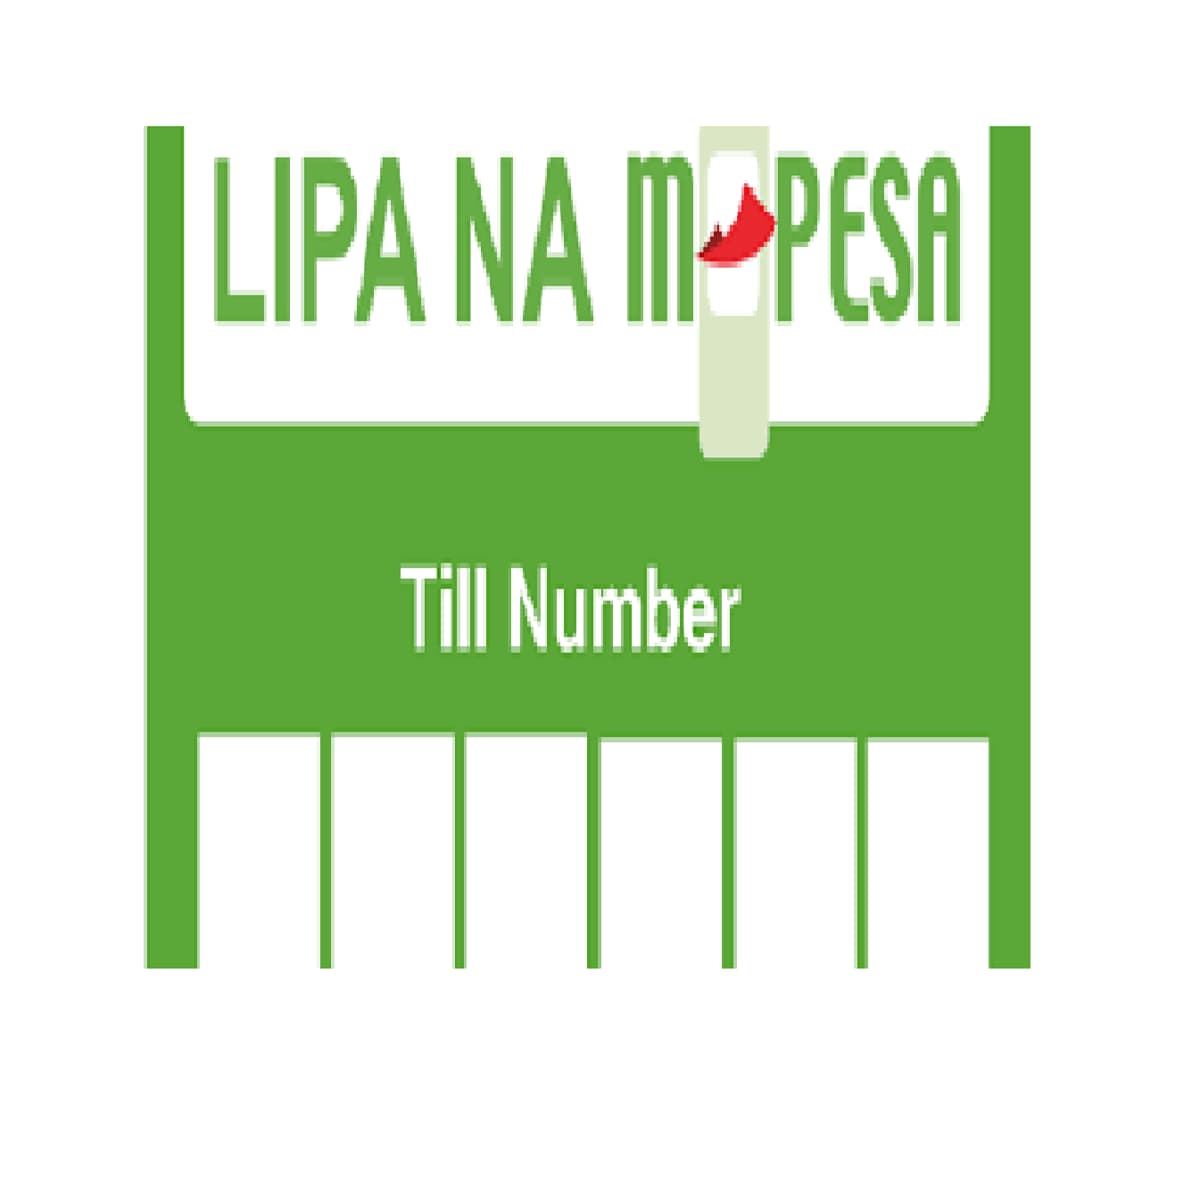 How to Apply for Safaricom Till Number